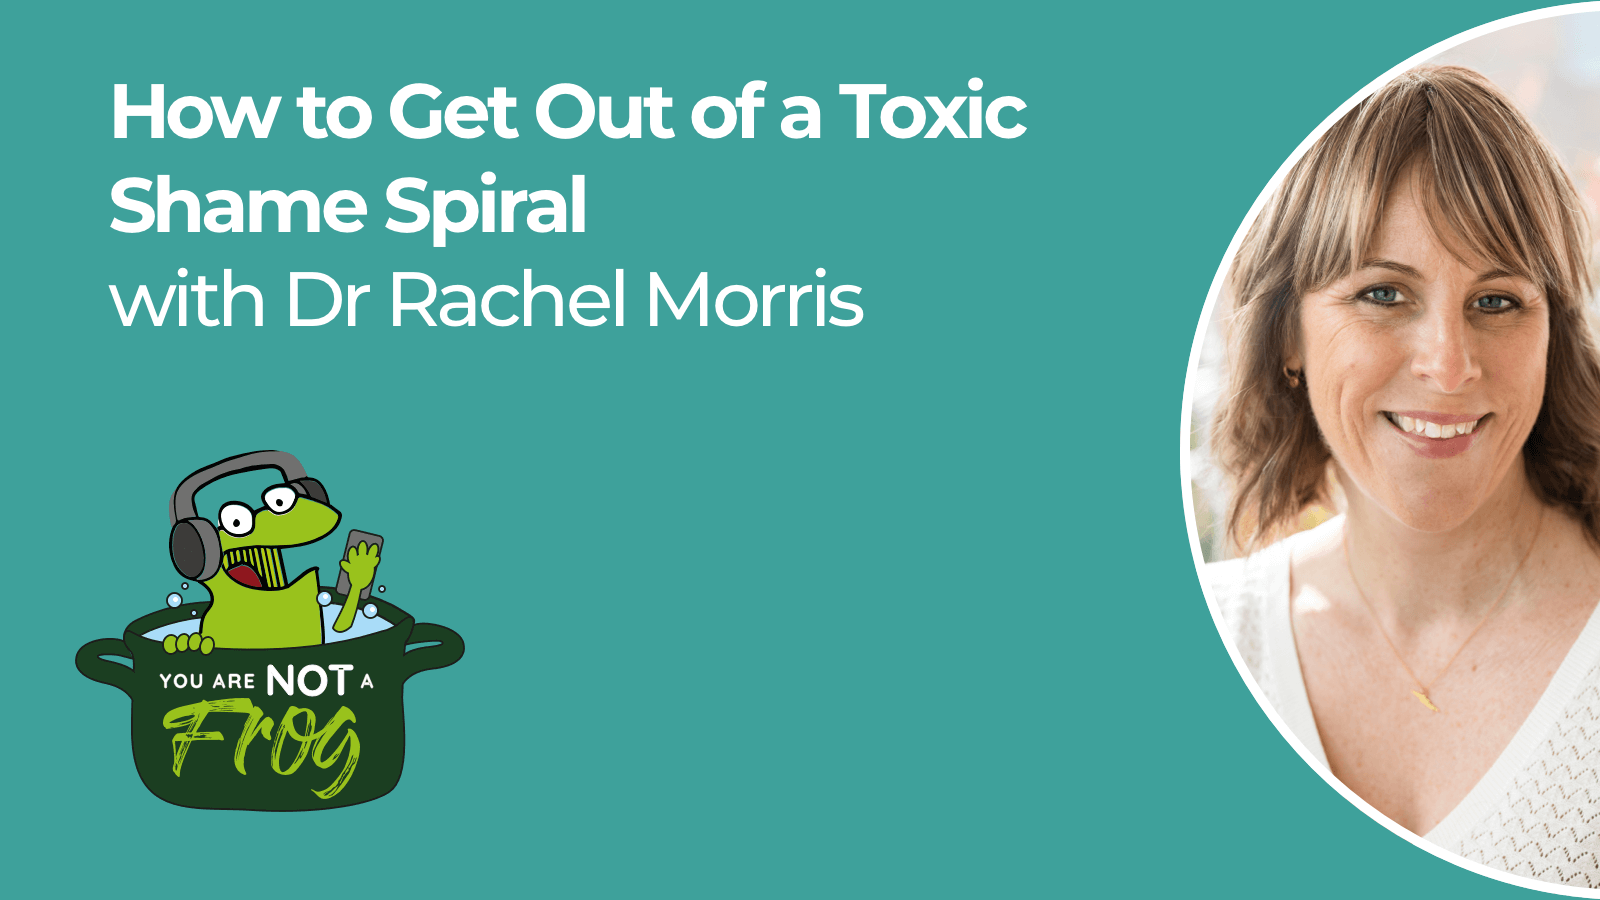 How to Get Out of a Toxic Shame Spiral